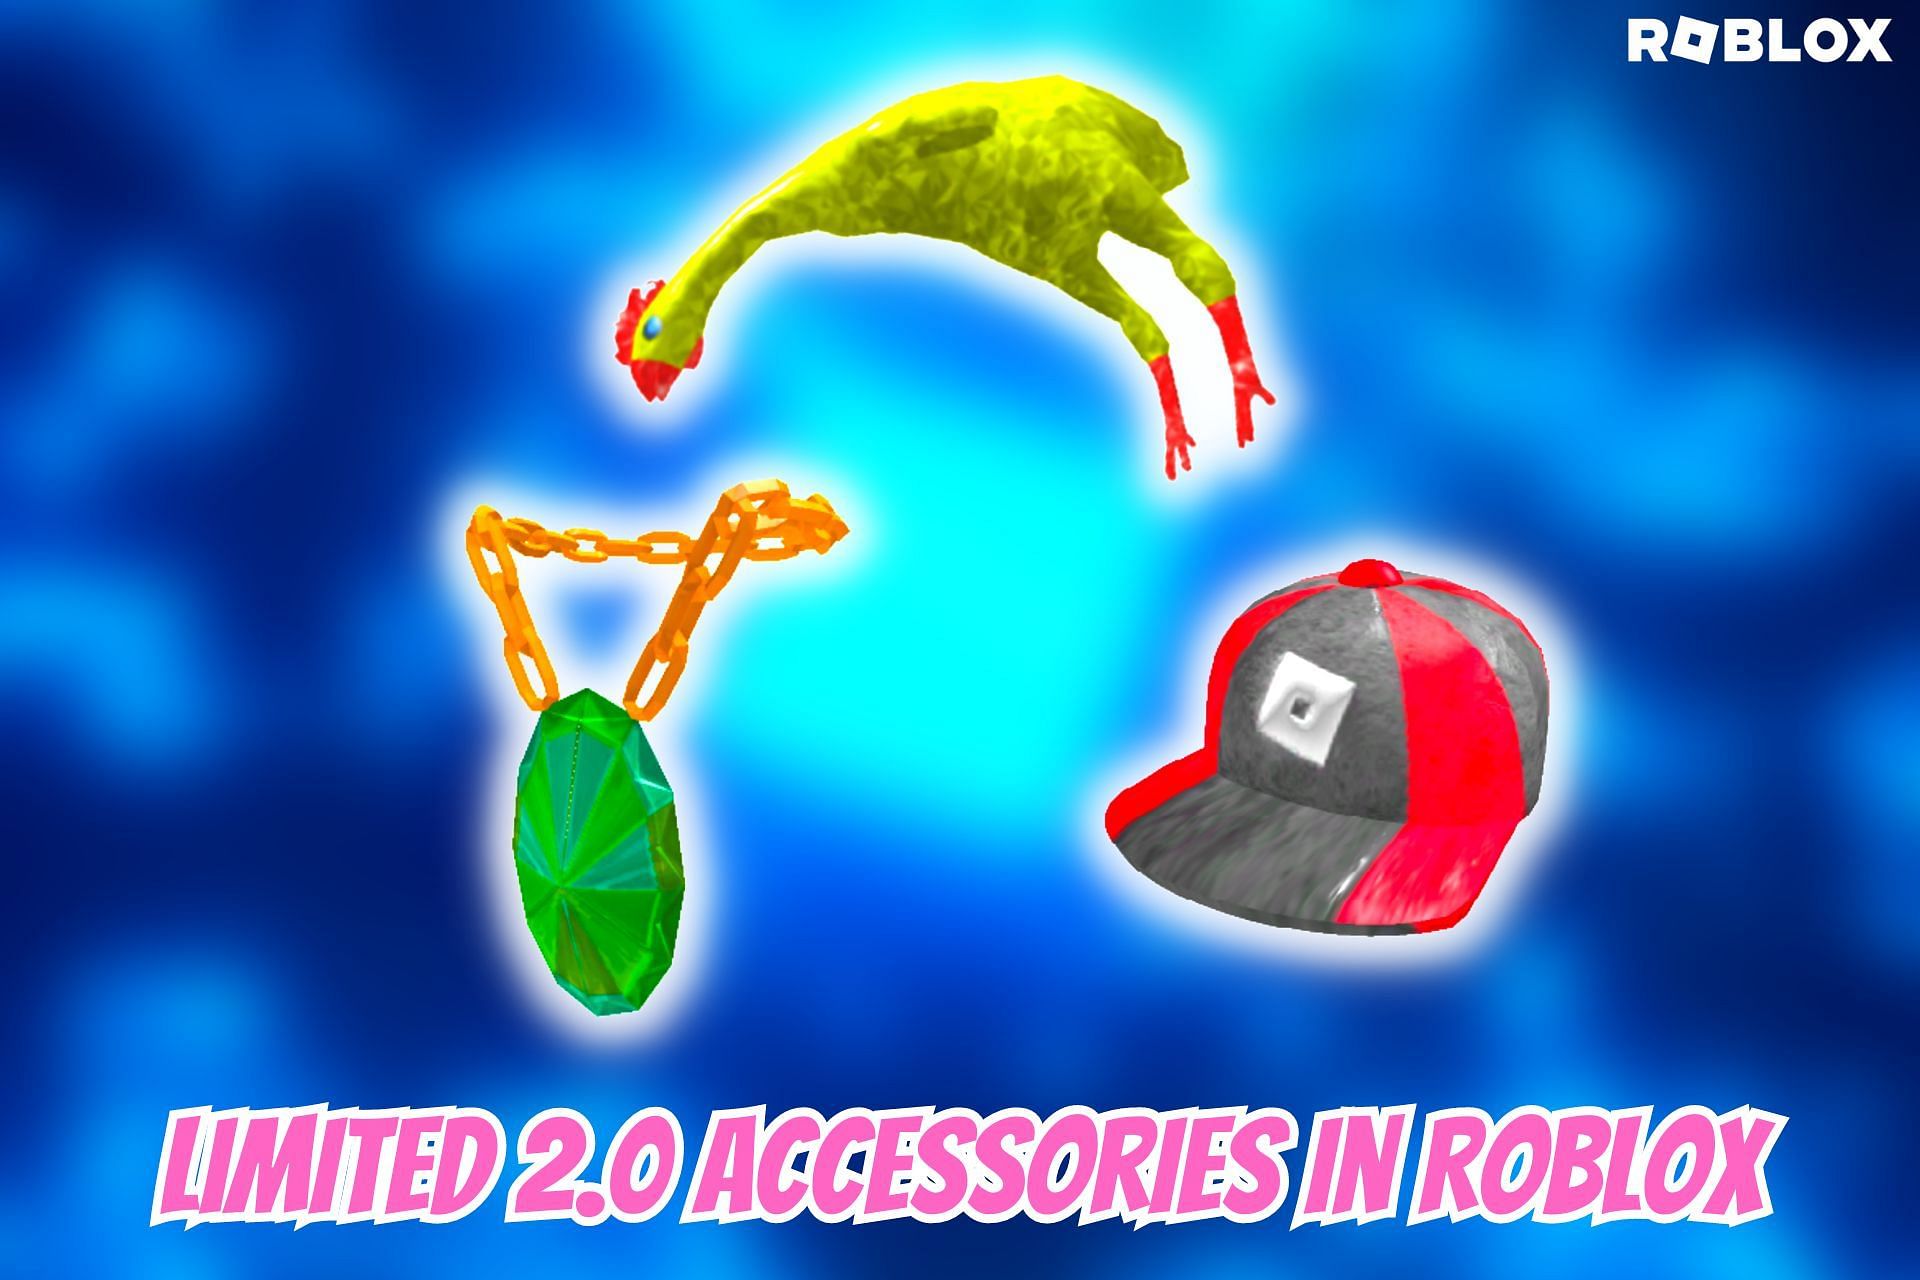 Limited 2.0 accessories in Roblox